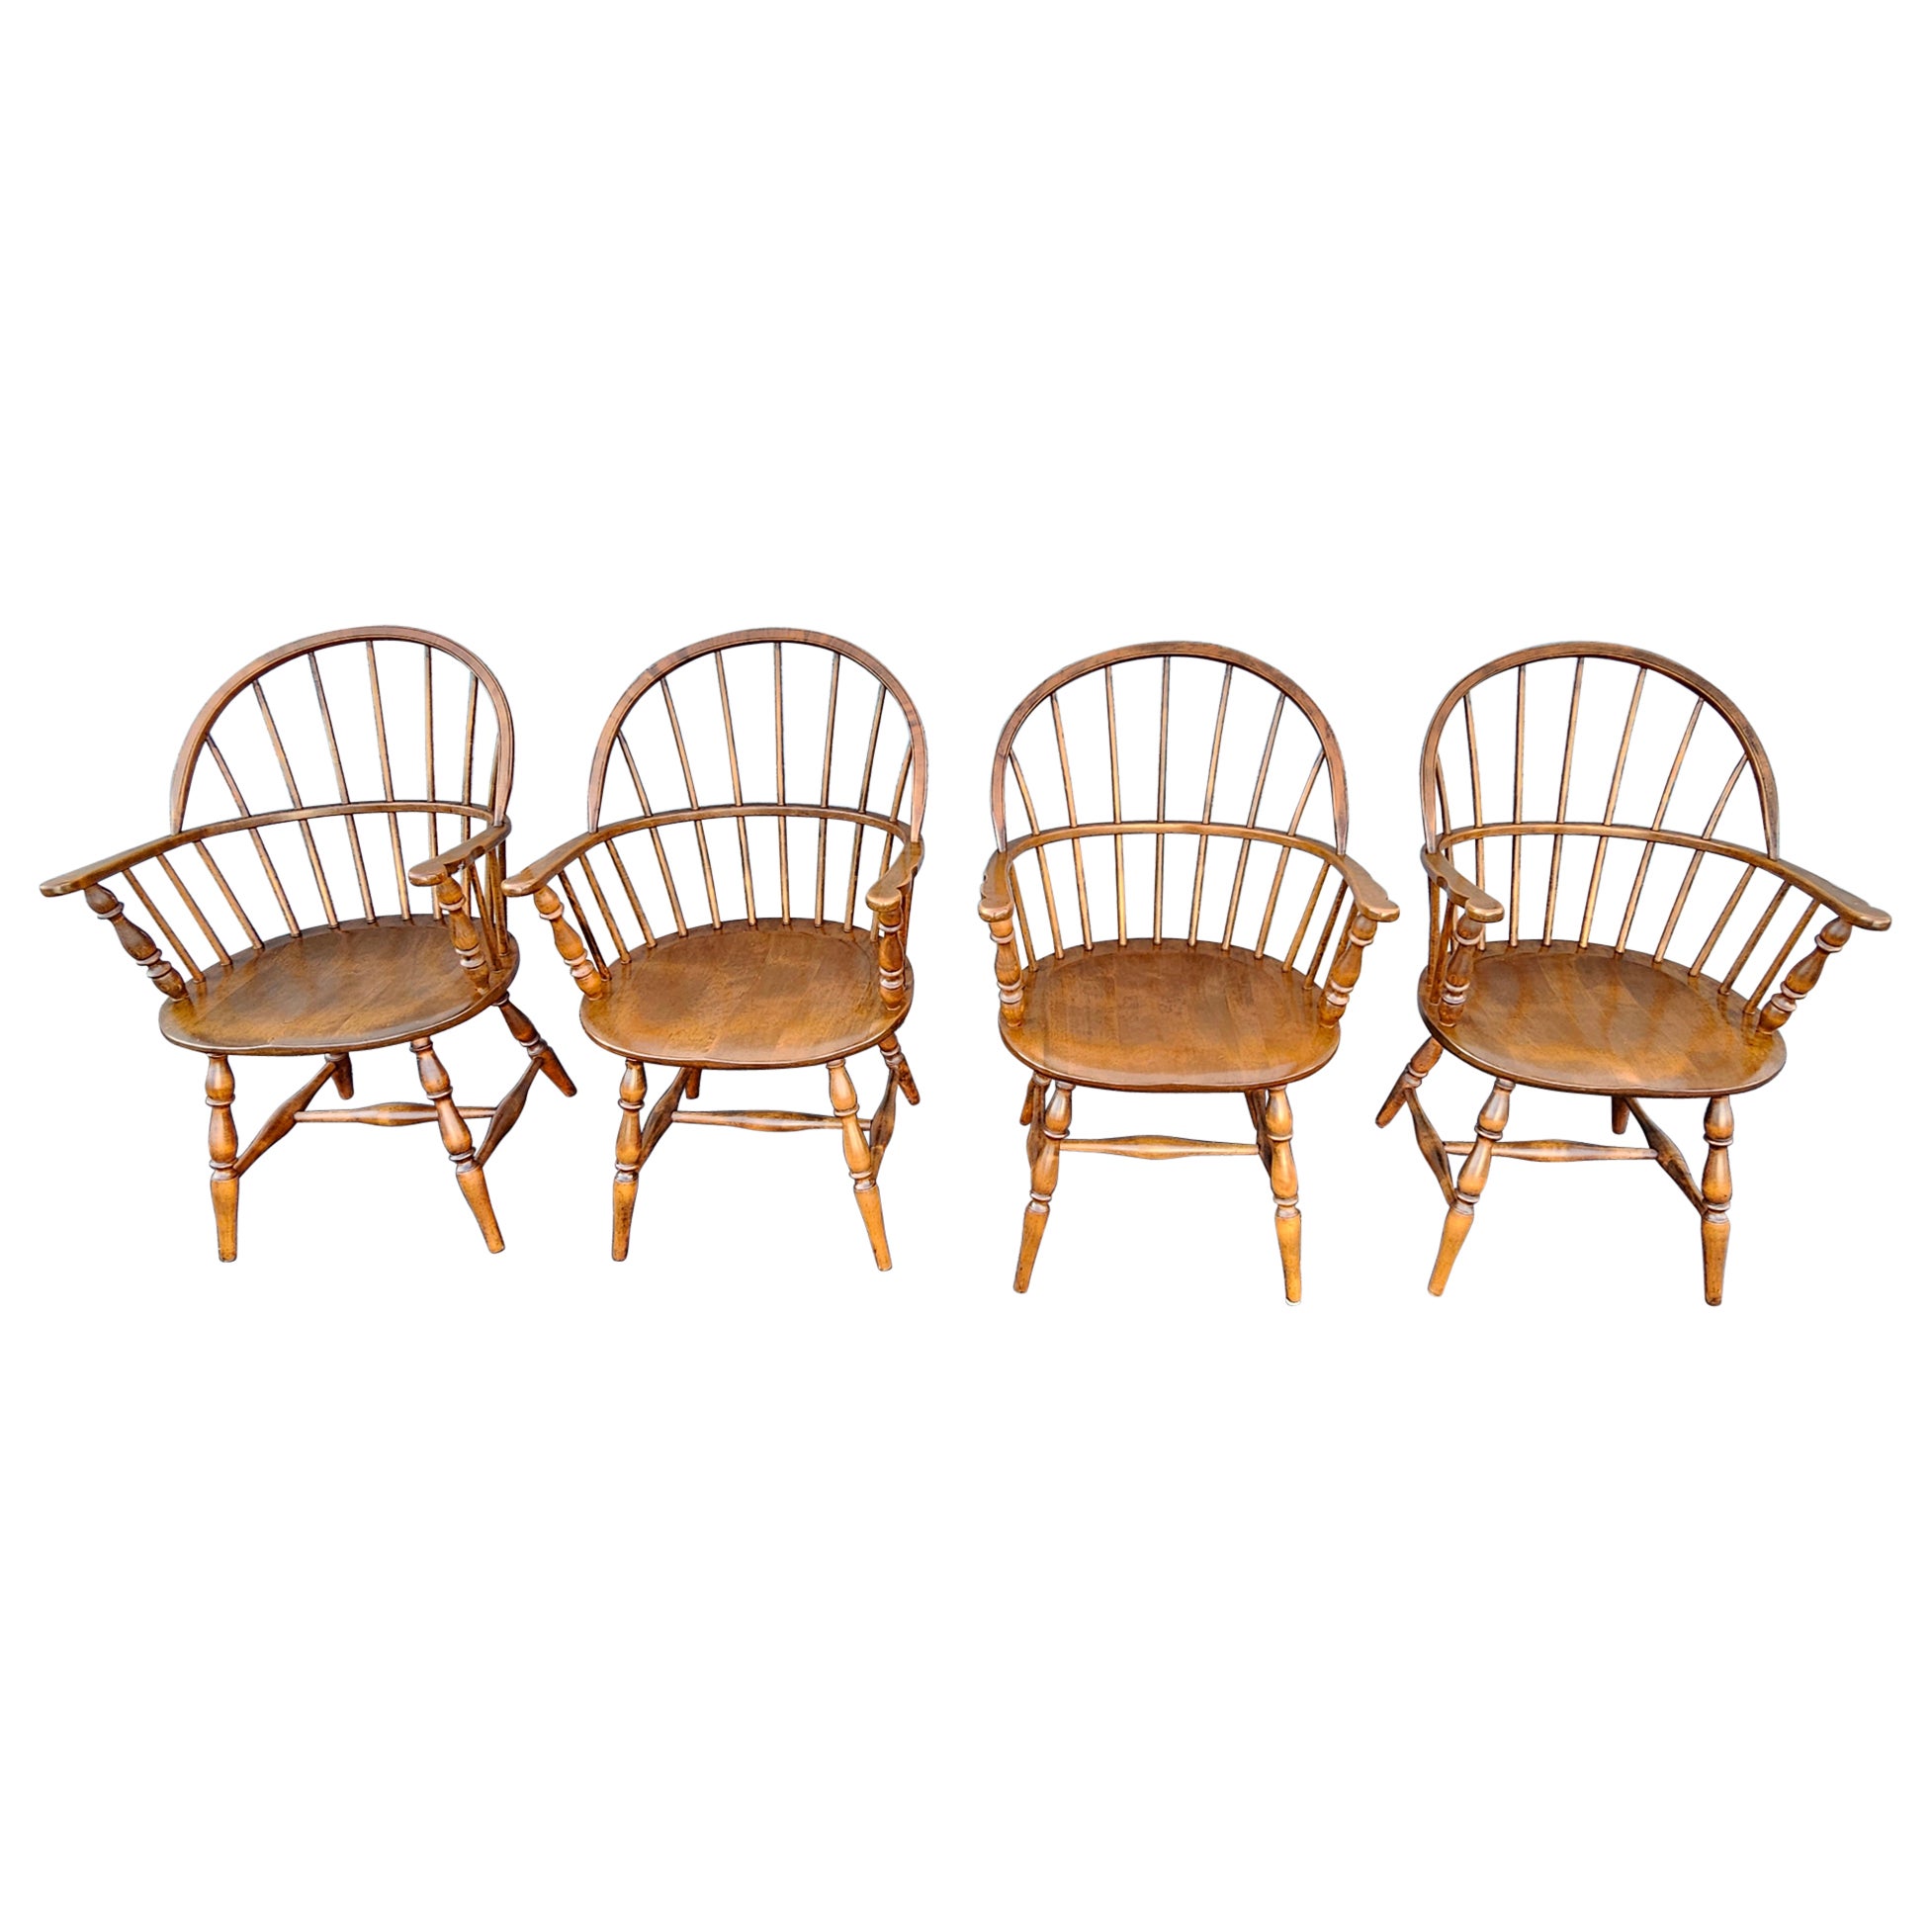 Set of Four Amish Handcrafted Maple Hoop Back Windsor Armchairs